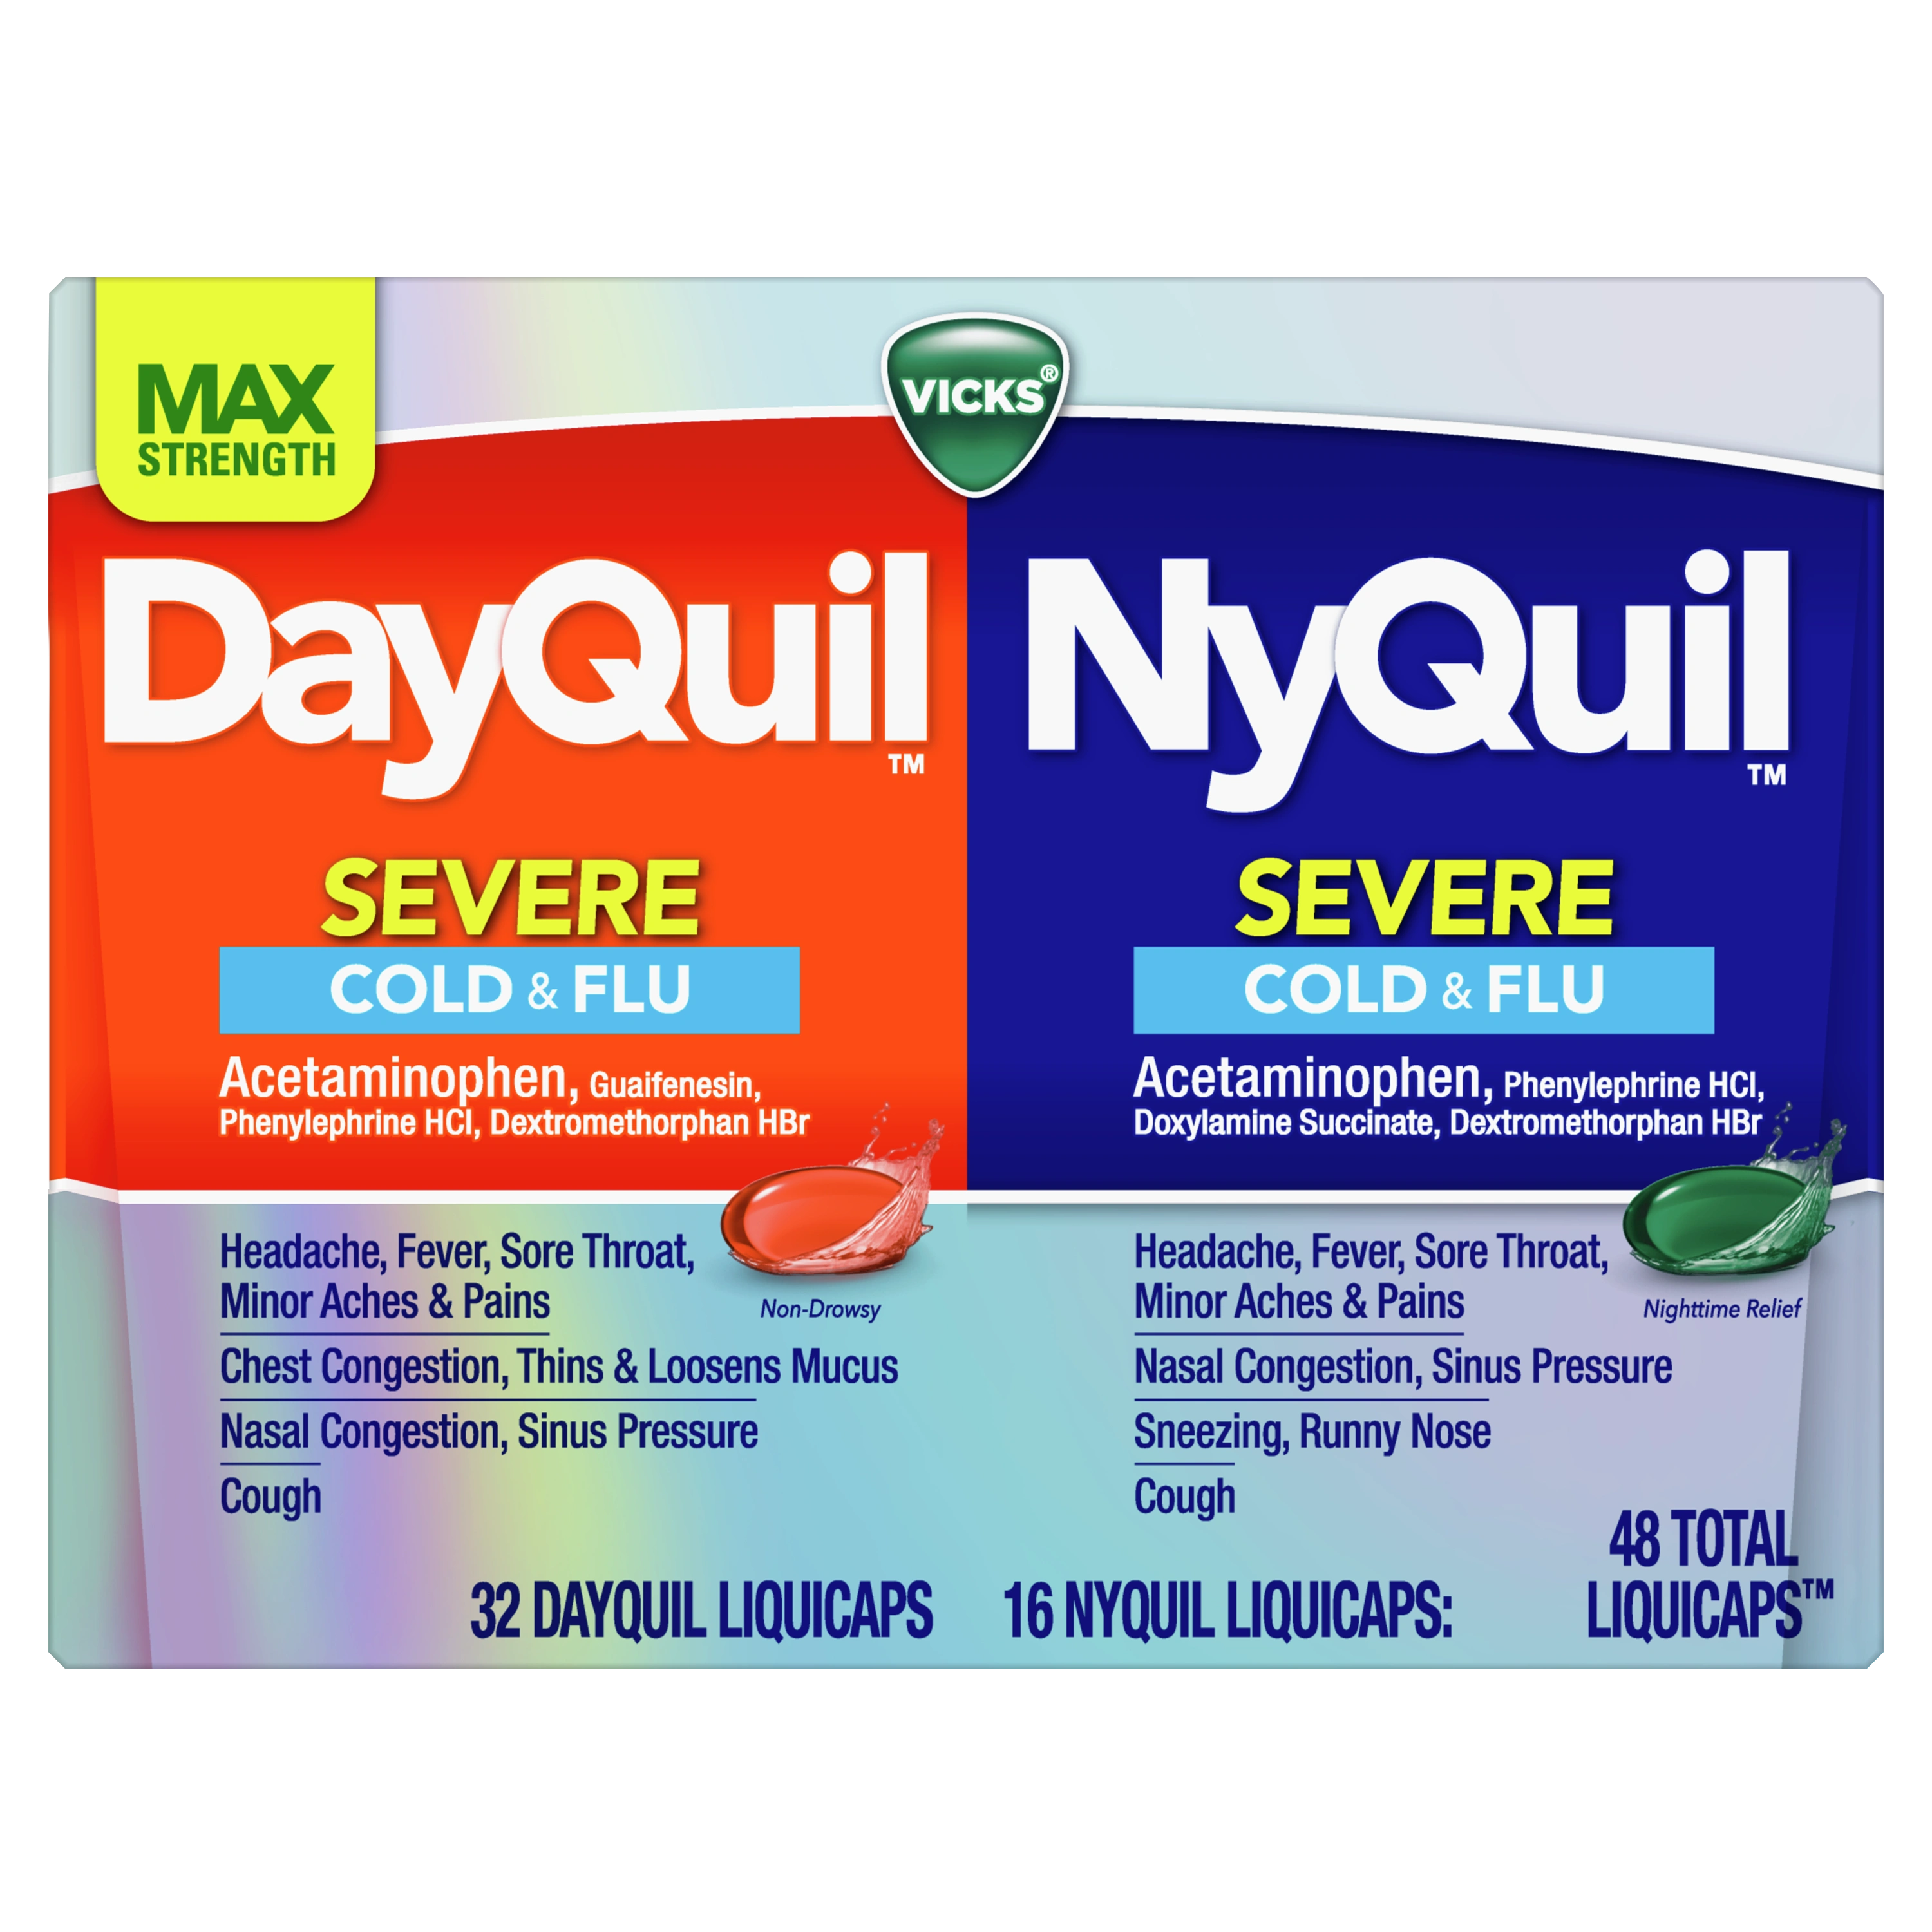 DayQuil™ and NyQuil™ SEVERE Maximum Strength Cough, Cold & Flu Relief Liqui...